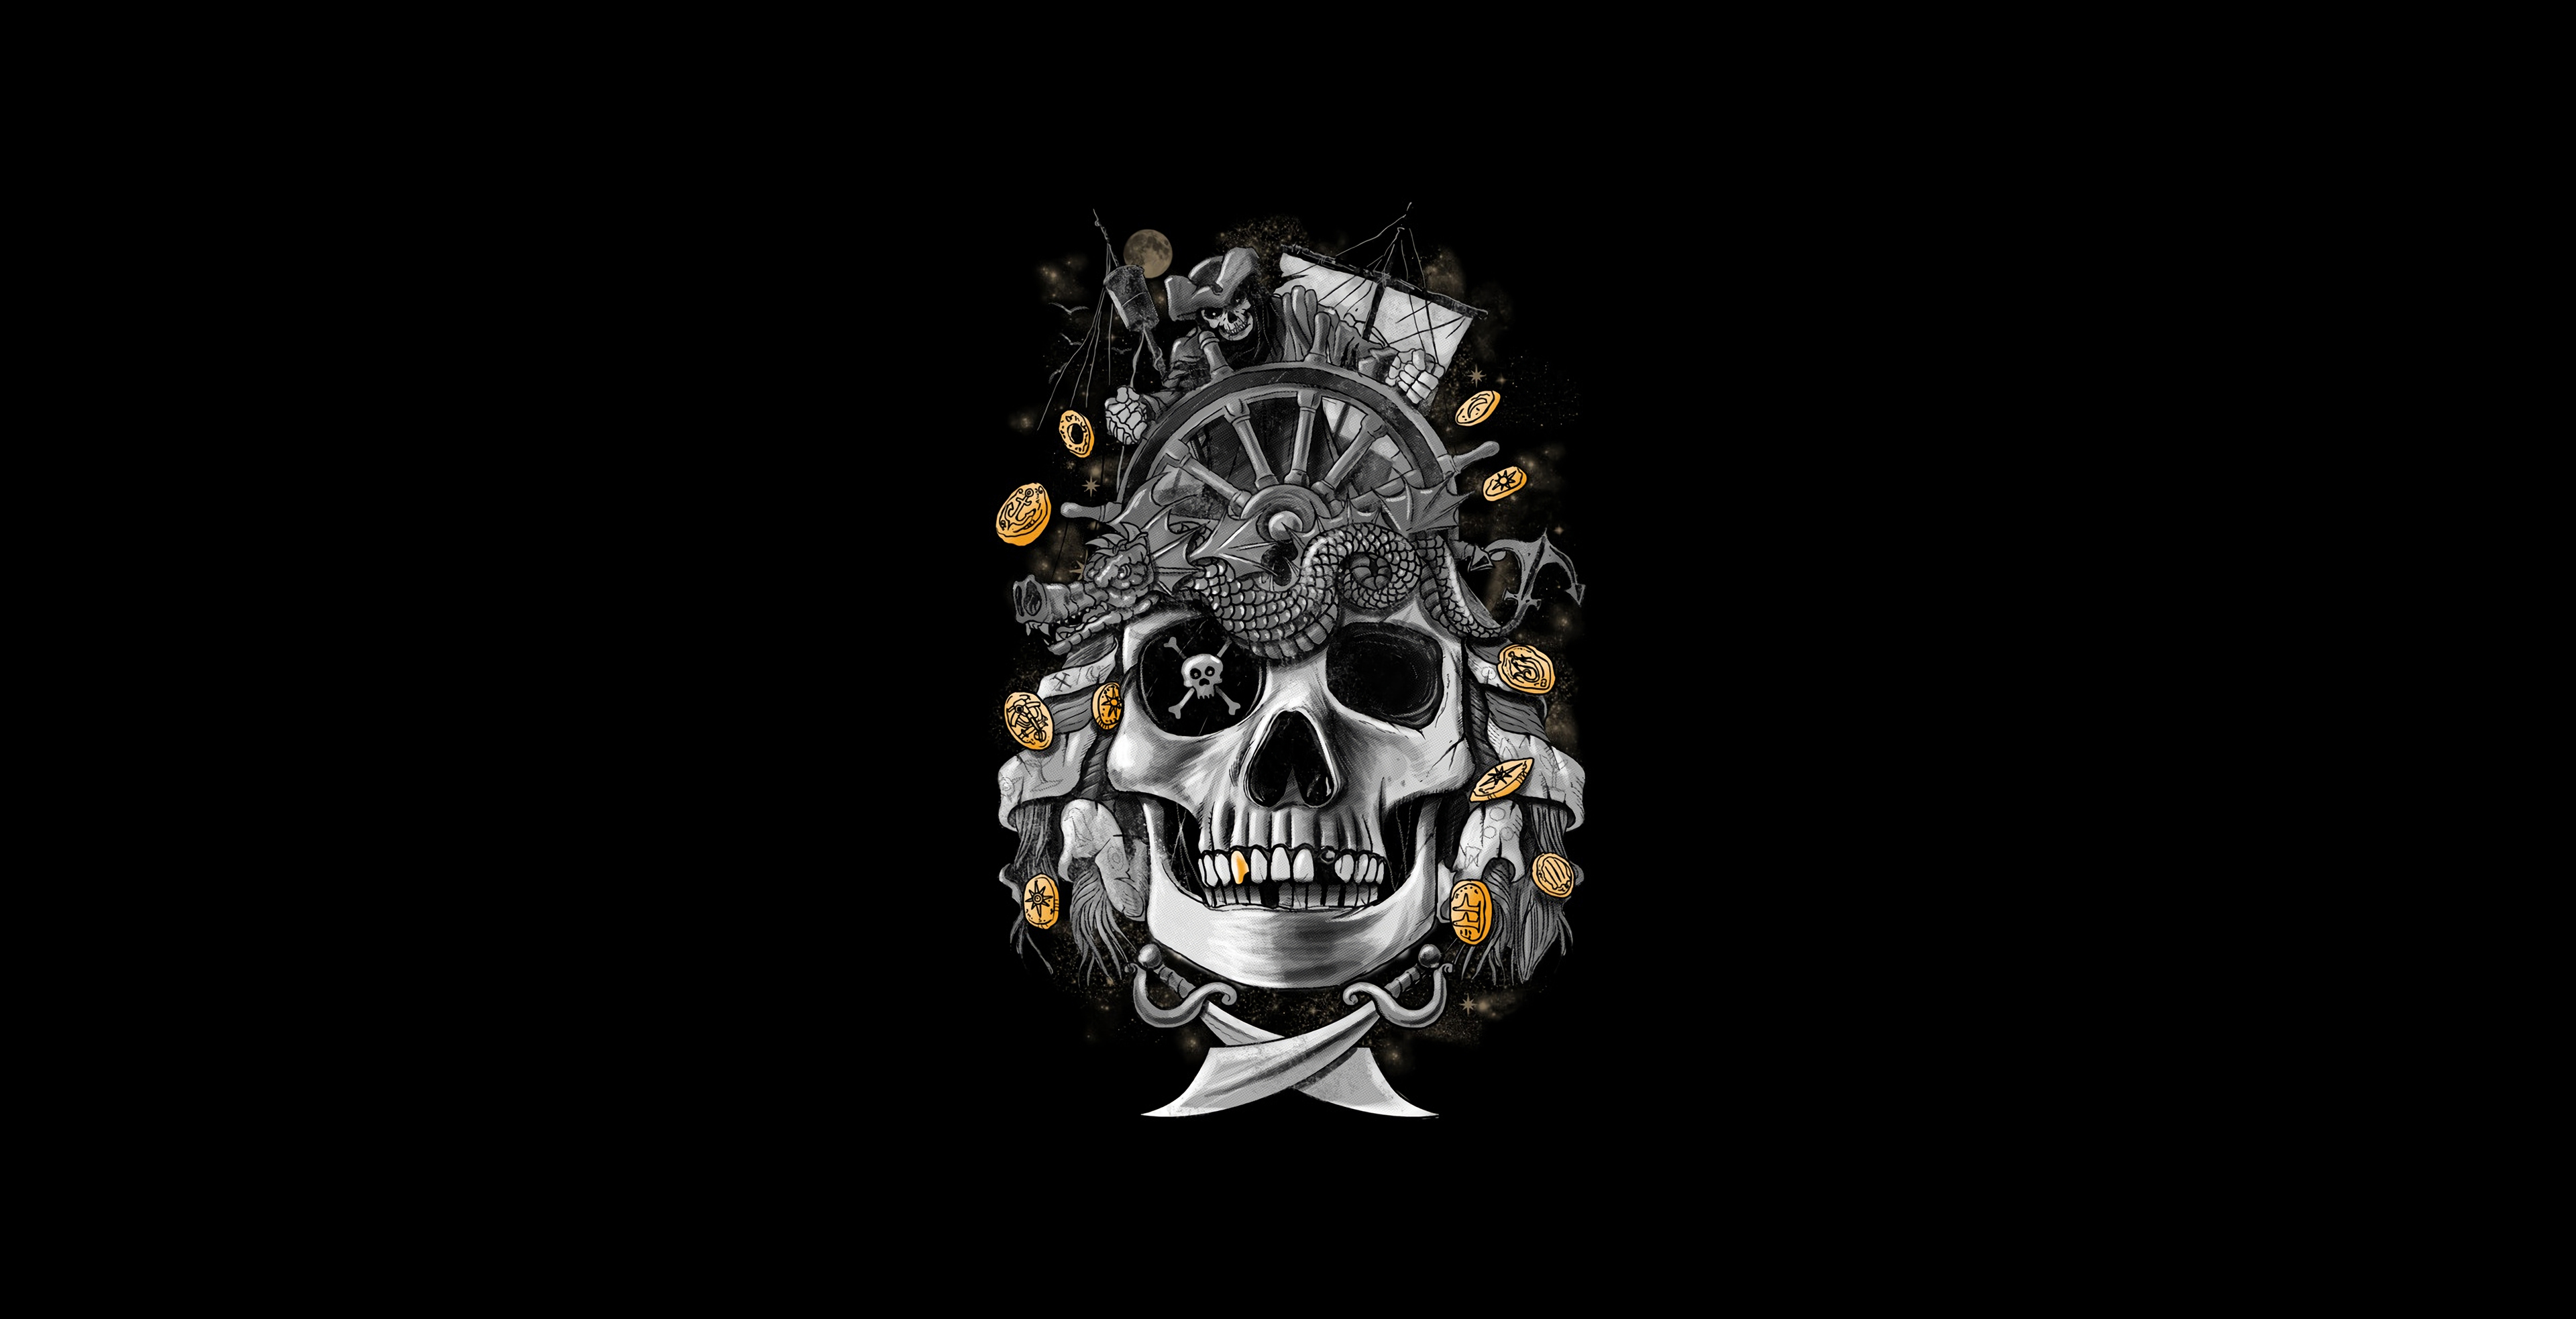 Dark gold skull k hd artist k wallpapers images backgrounds photos and pictures